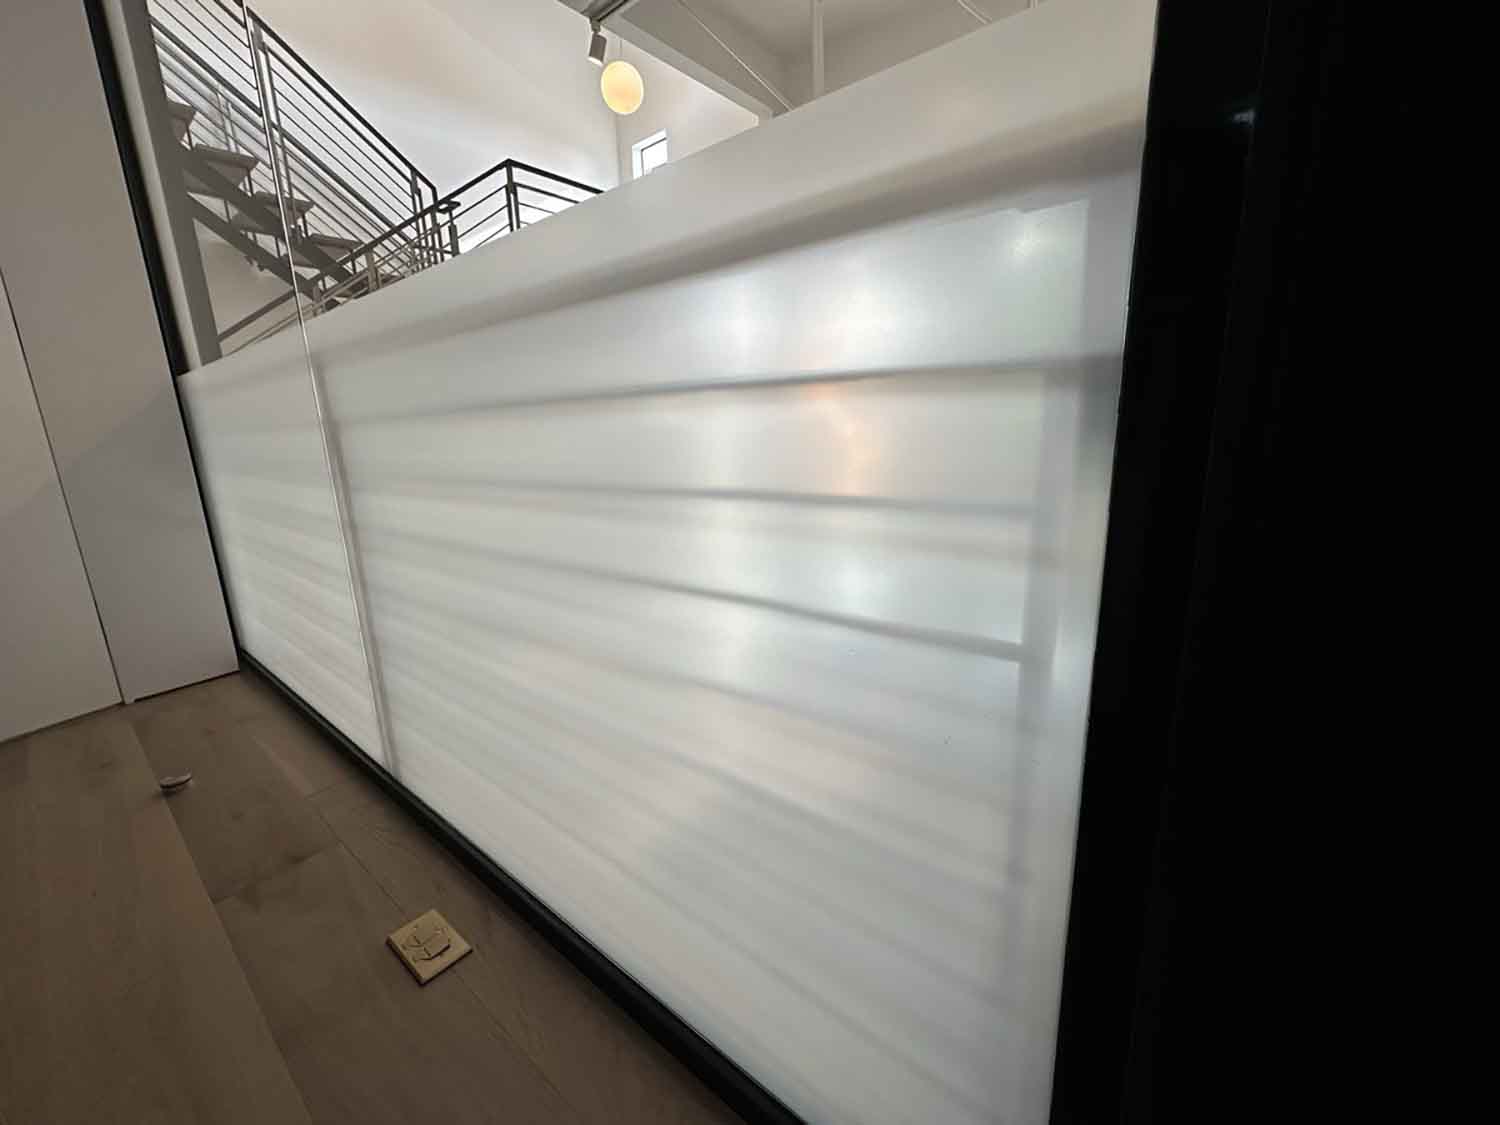 A Fremont, CA Office Gets More Privacy With Frosted Window Tint